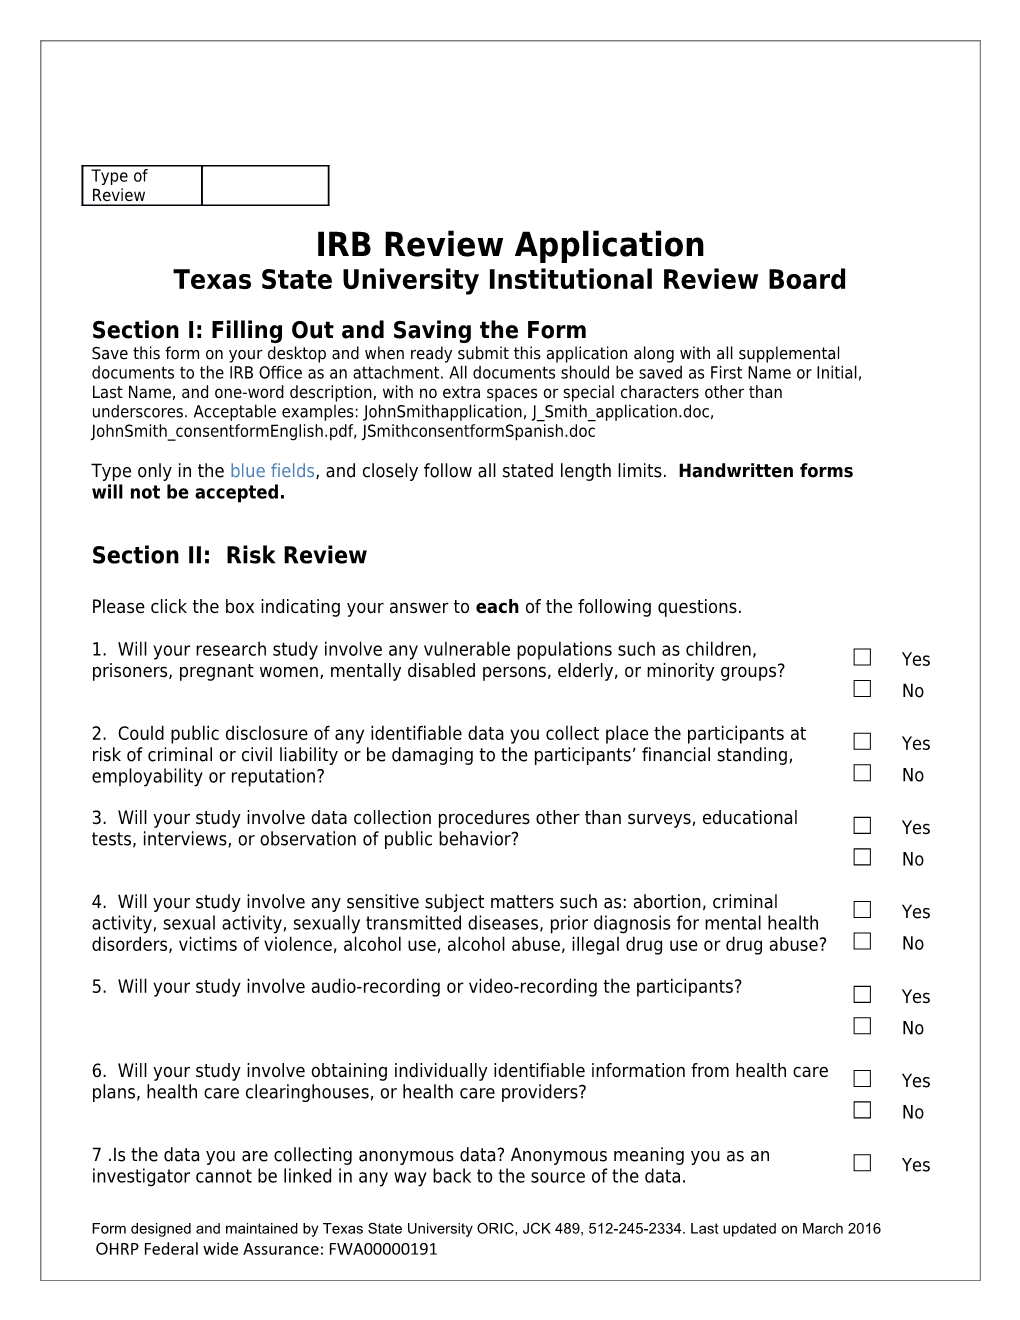 Texas State University Institutional Review Board